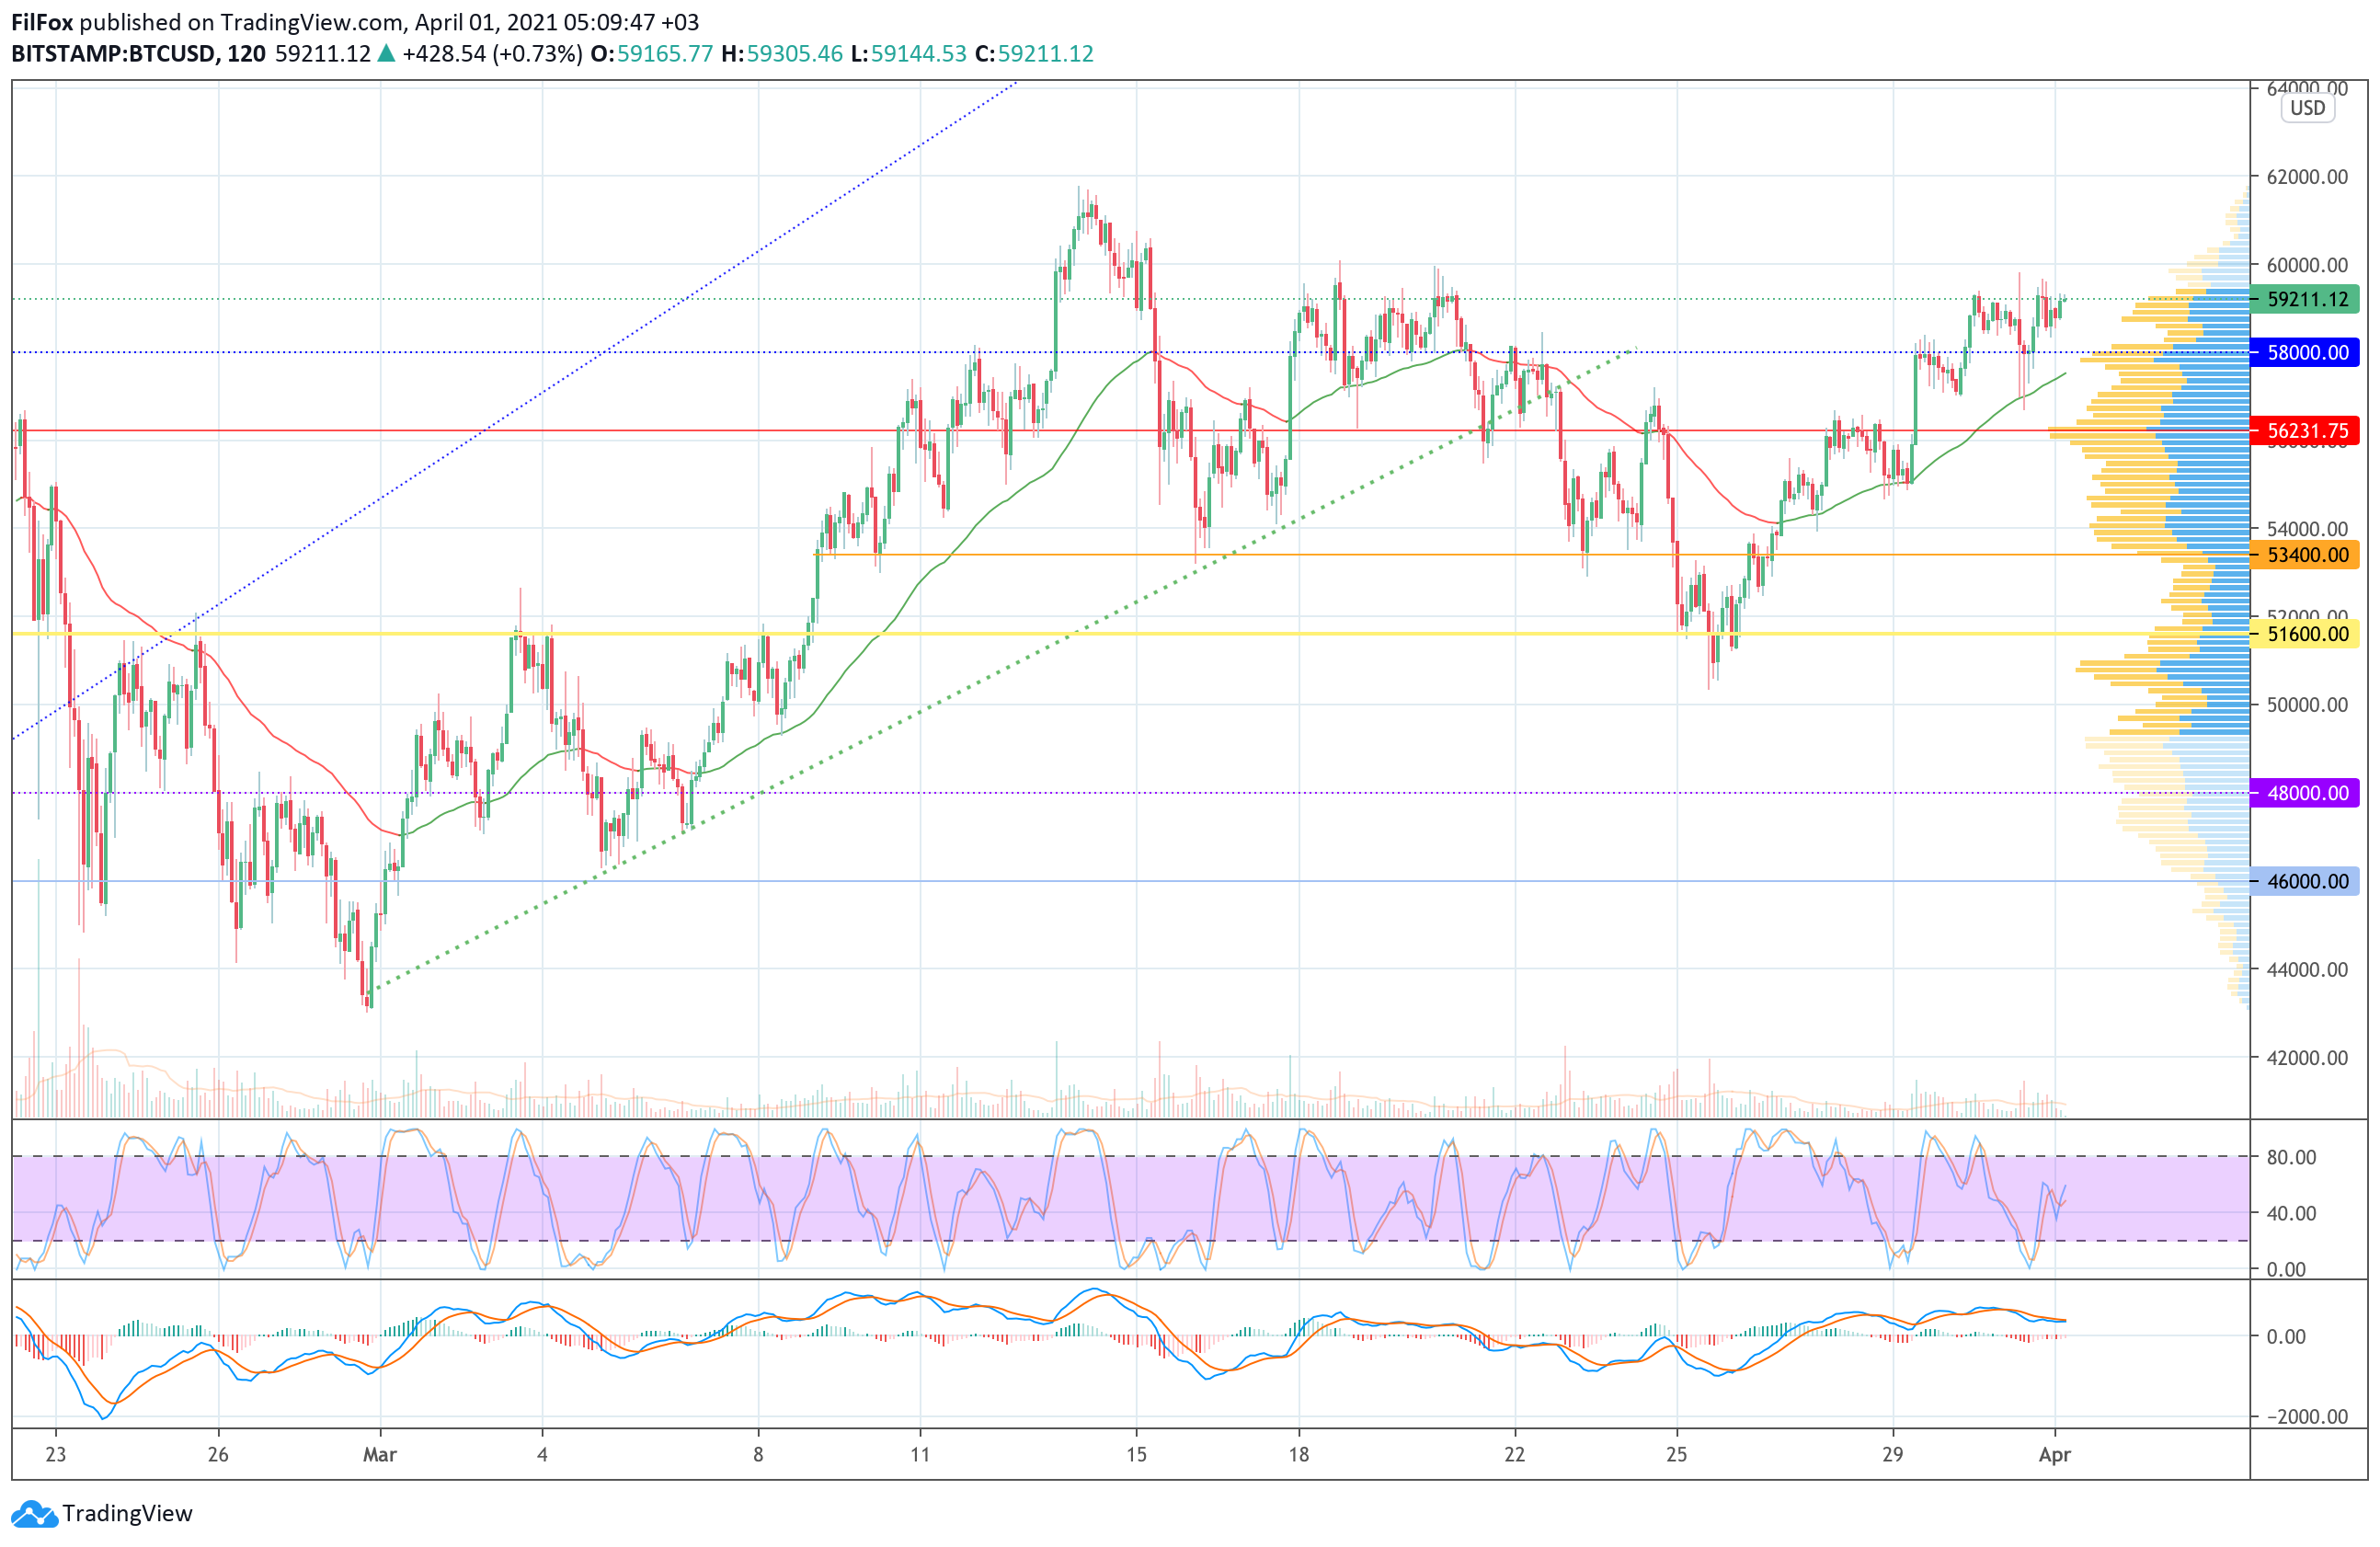 Analysis of the prices of Bitcoin, Ethereum, XRP for 04/01/2021